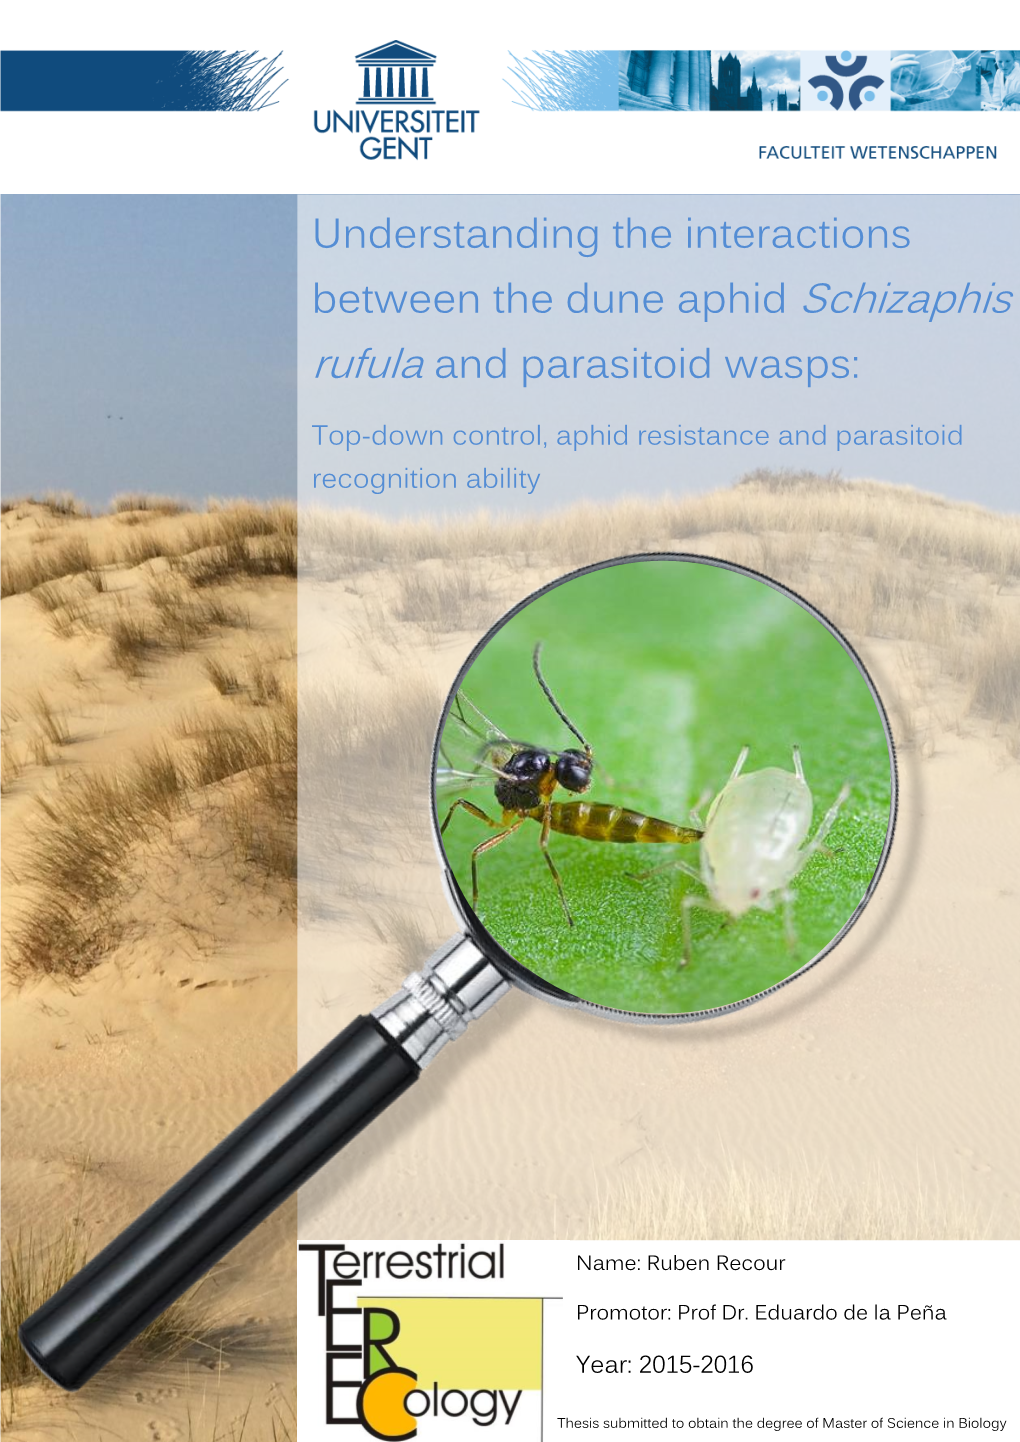 Understanding the Interactions Between the Dune Aphid Schizaphis Rufula and Parasitoid Wasps